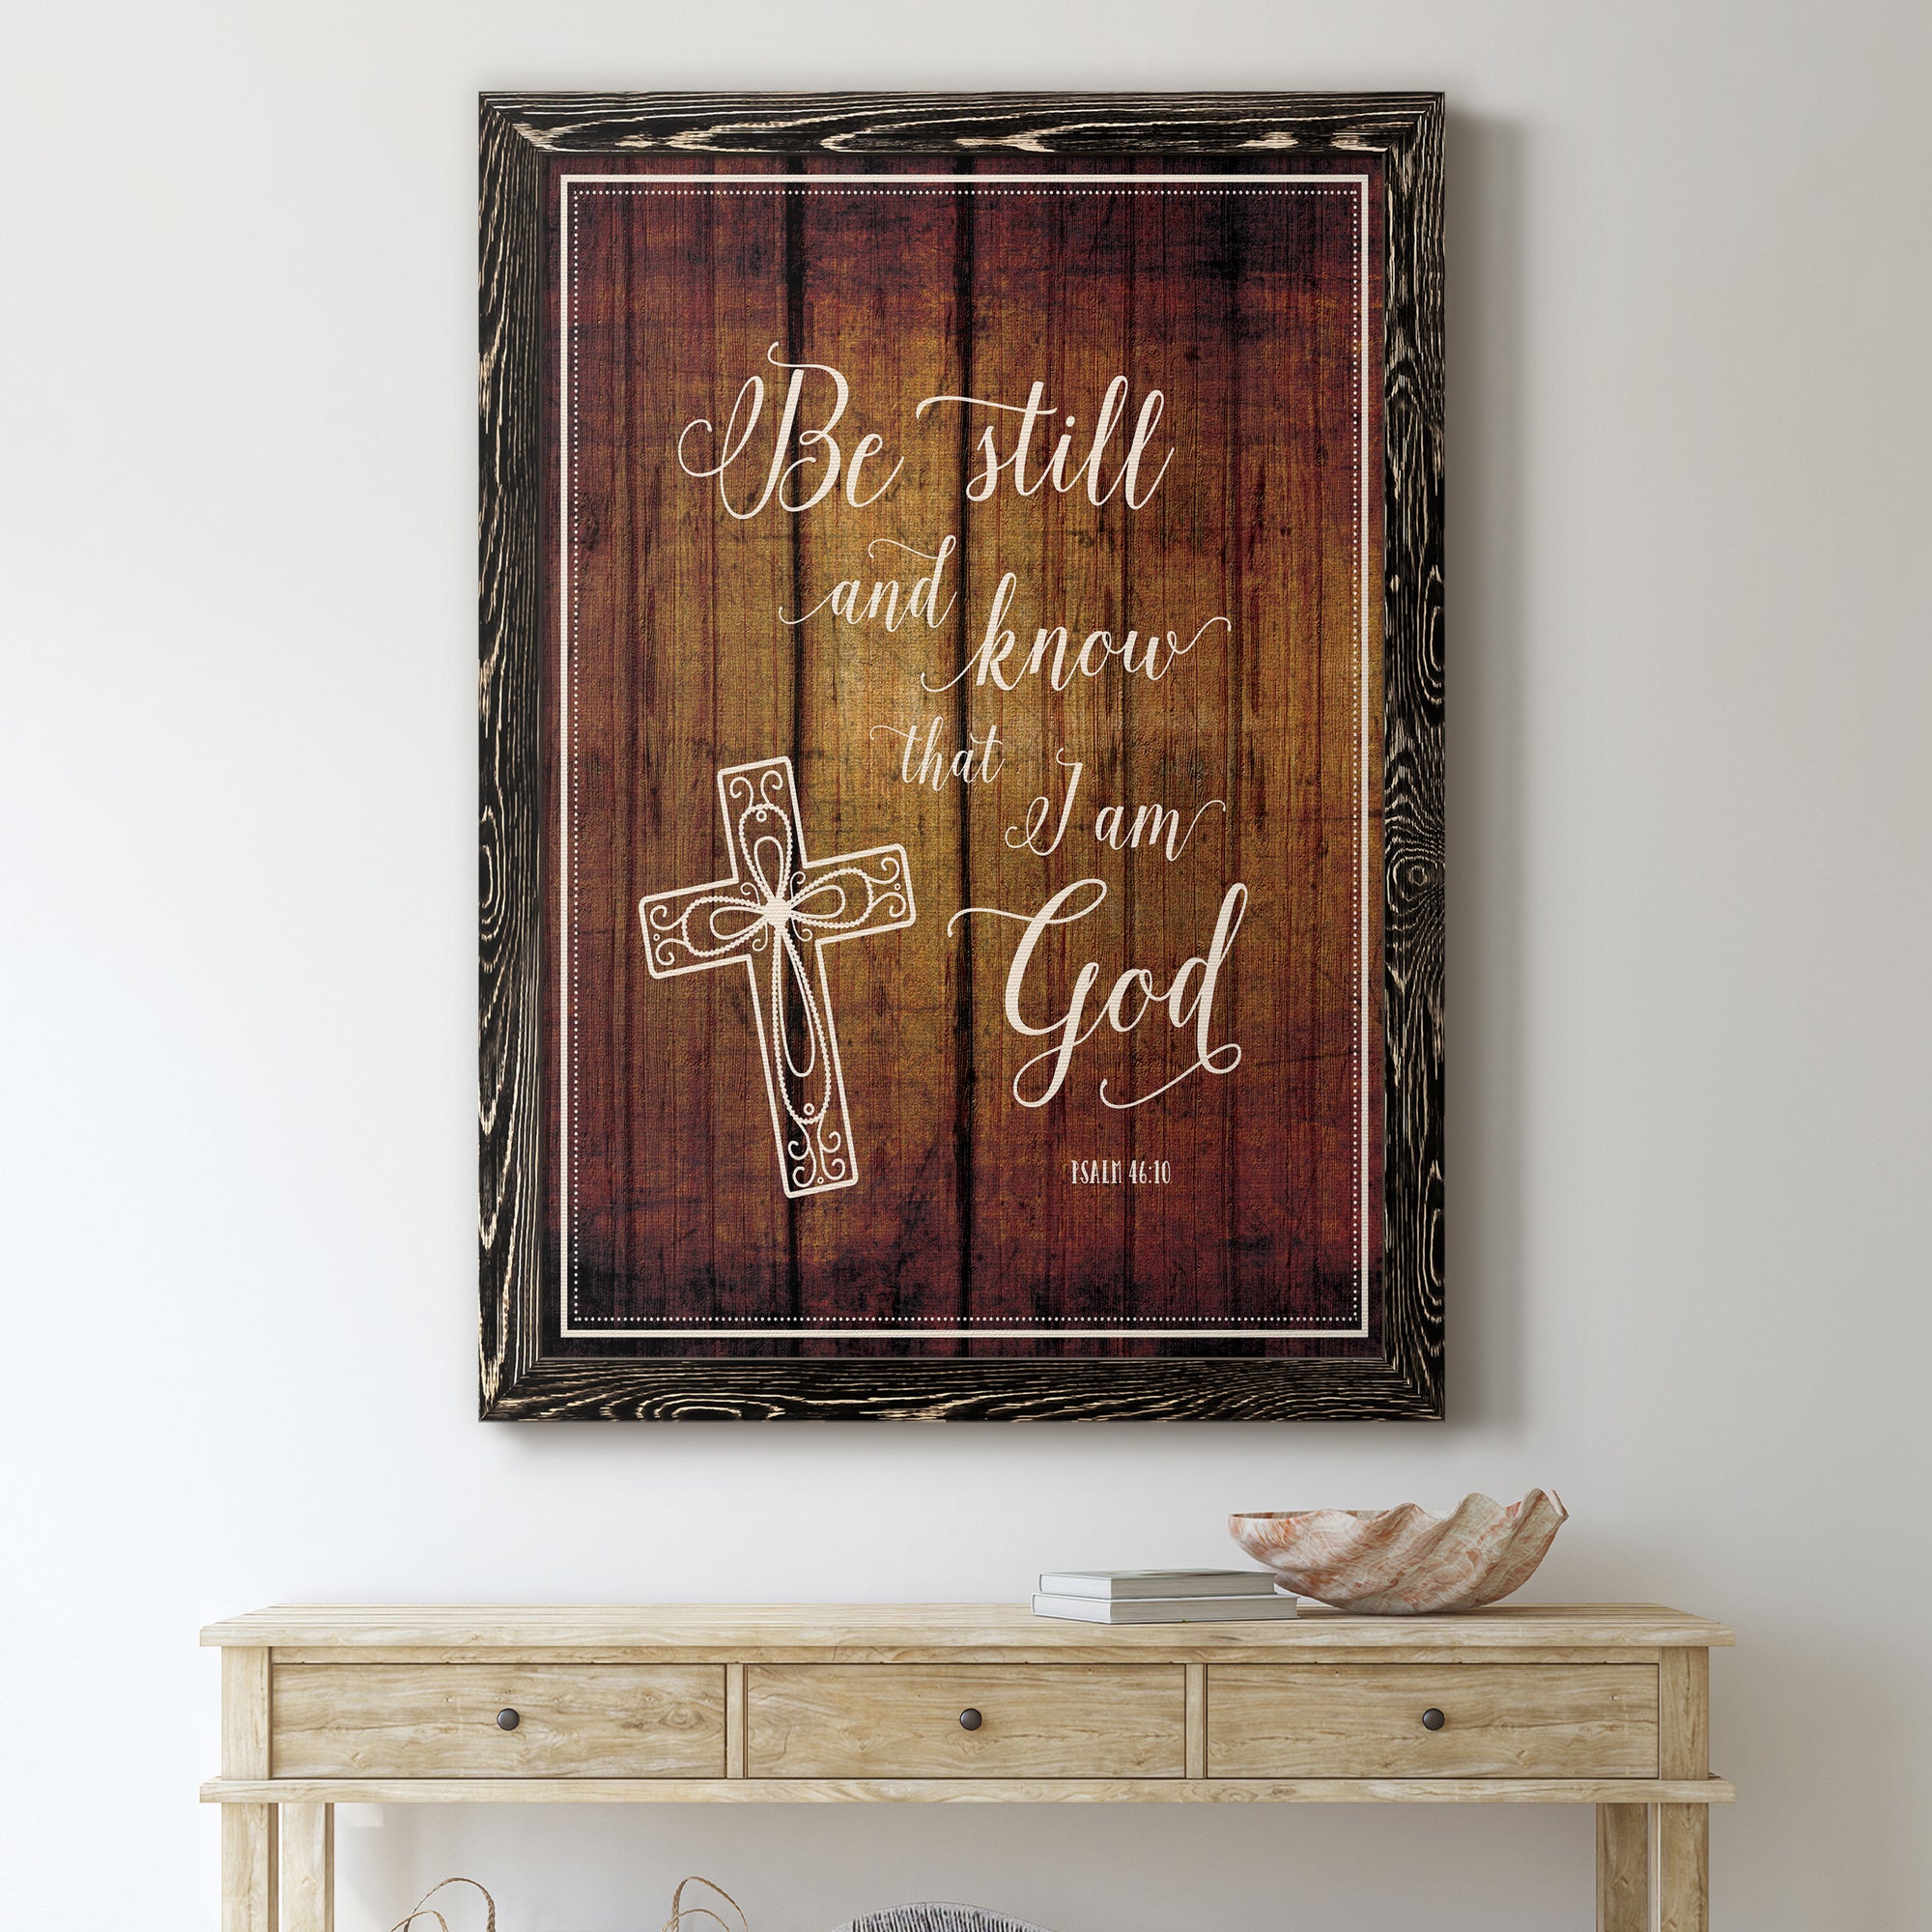 Be Still - Premium Canvas Framed in Barnwood - Ready to Hang